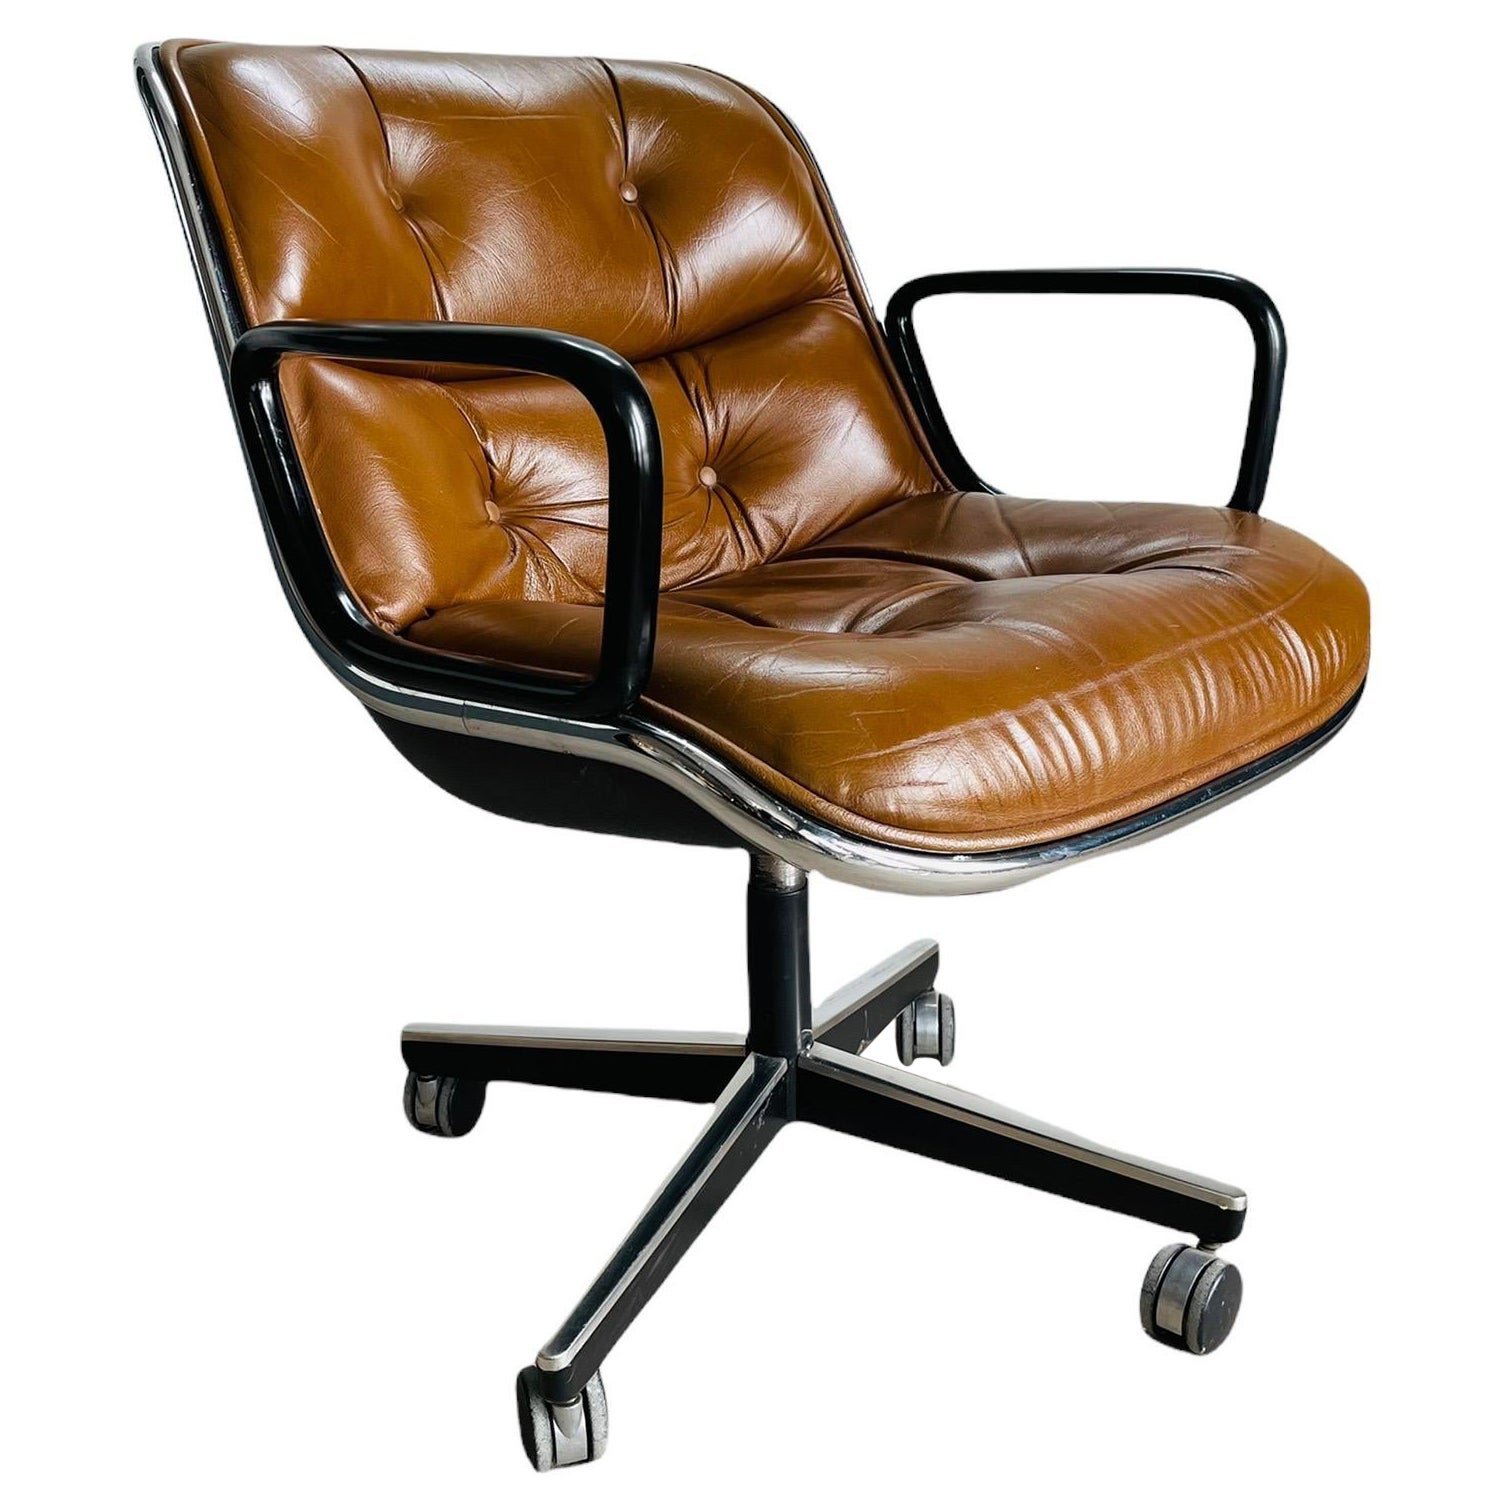 Pollock Executive Office Armchair Designed by Charles Pollock for Knoll